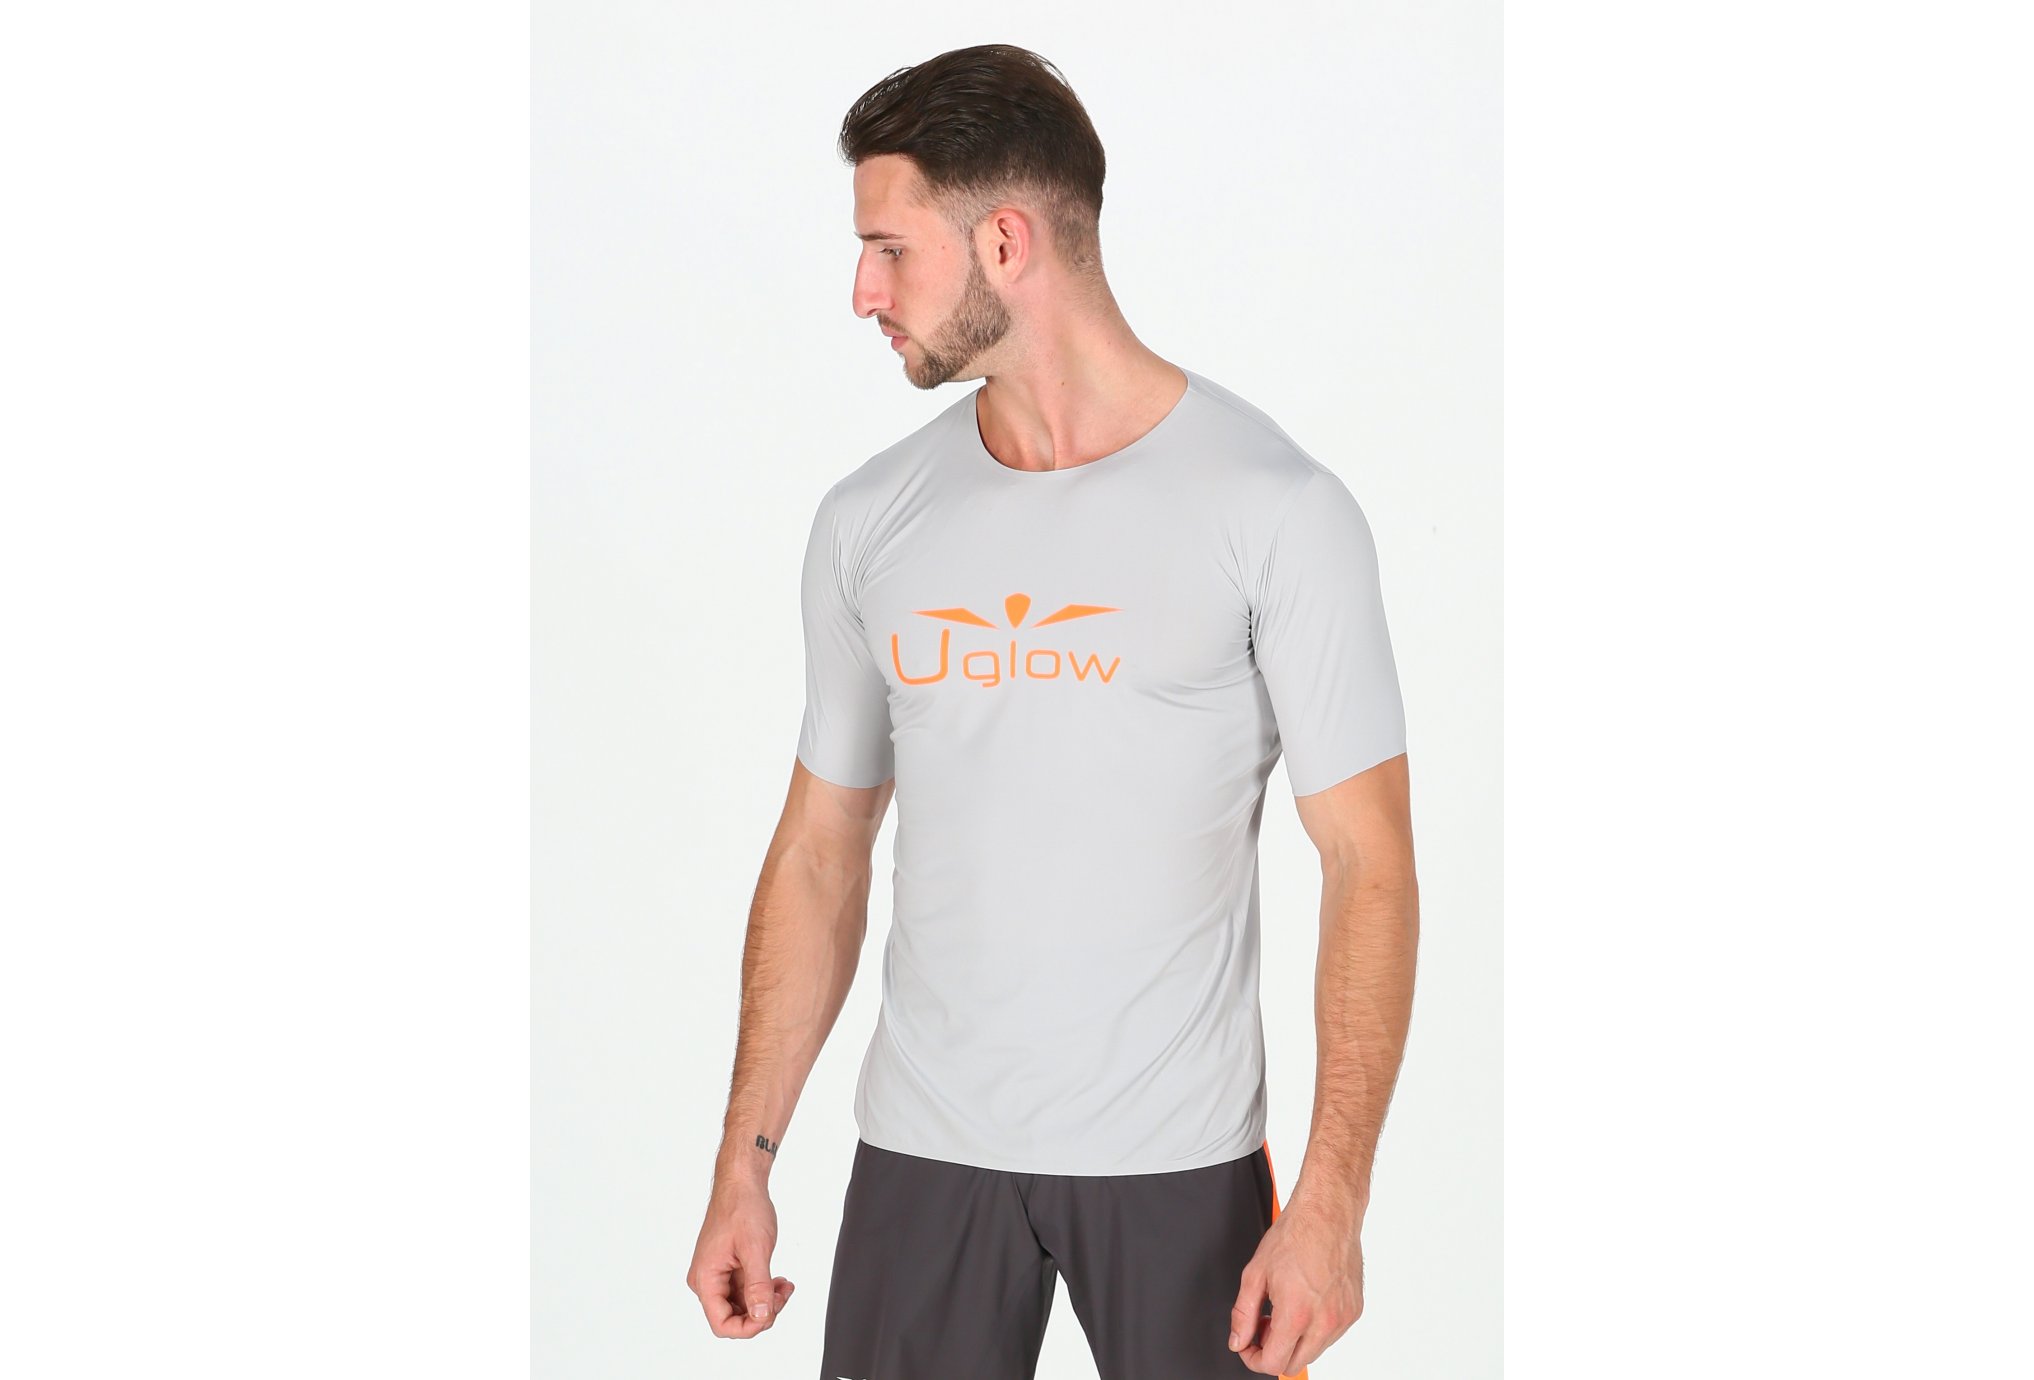 Uglow Tee-Shirt m dittique vtements homme